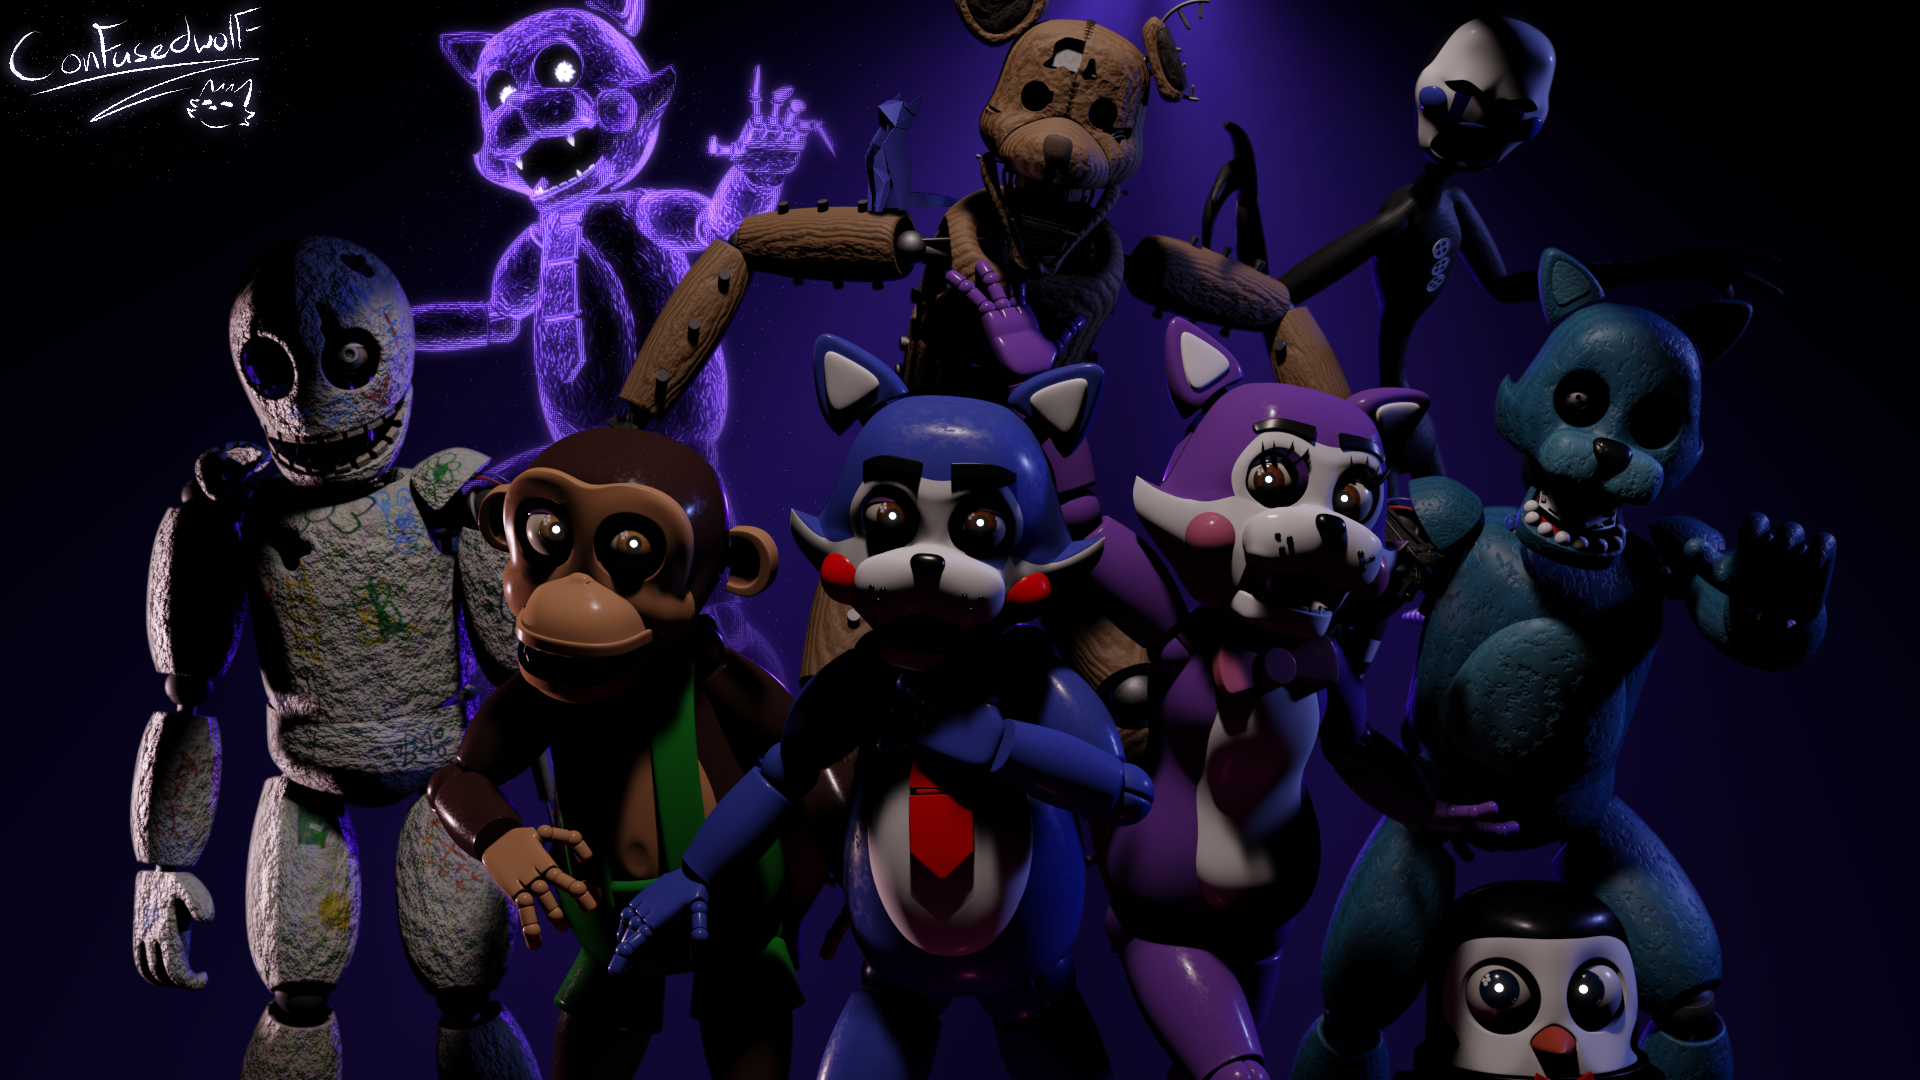 C4D) Five Nights at Candy's 4 by freddygamer24 on DeviantArt